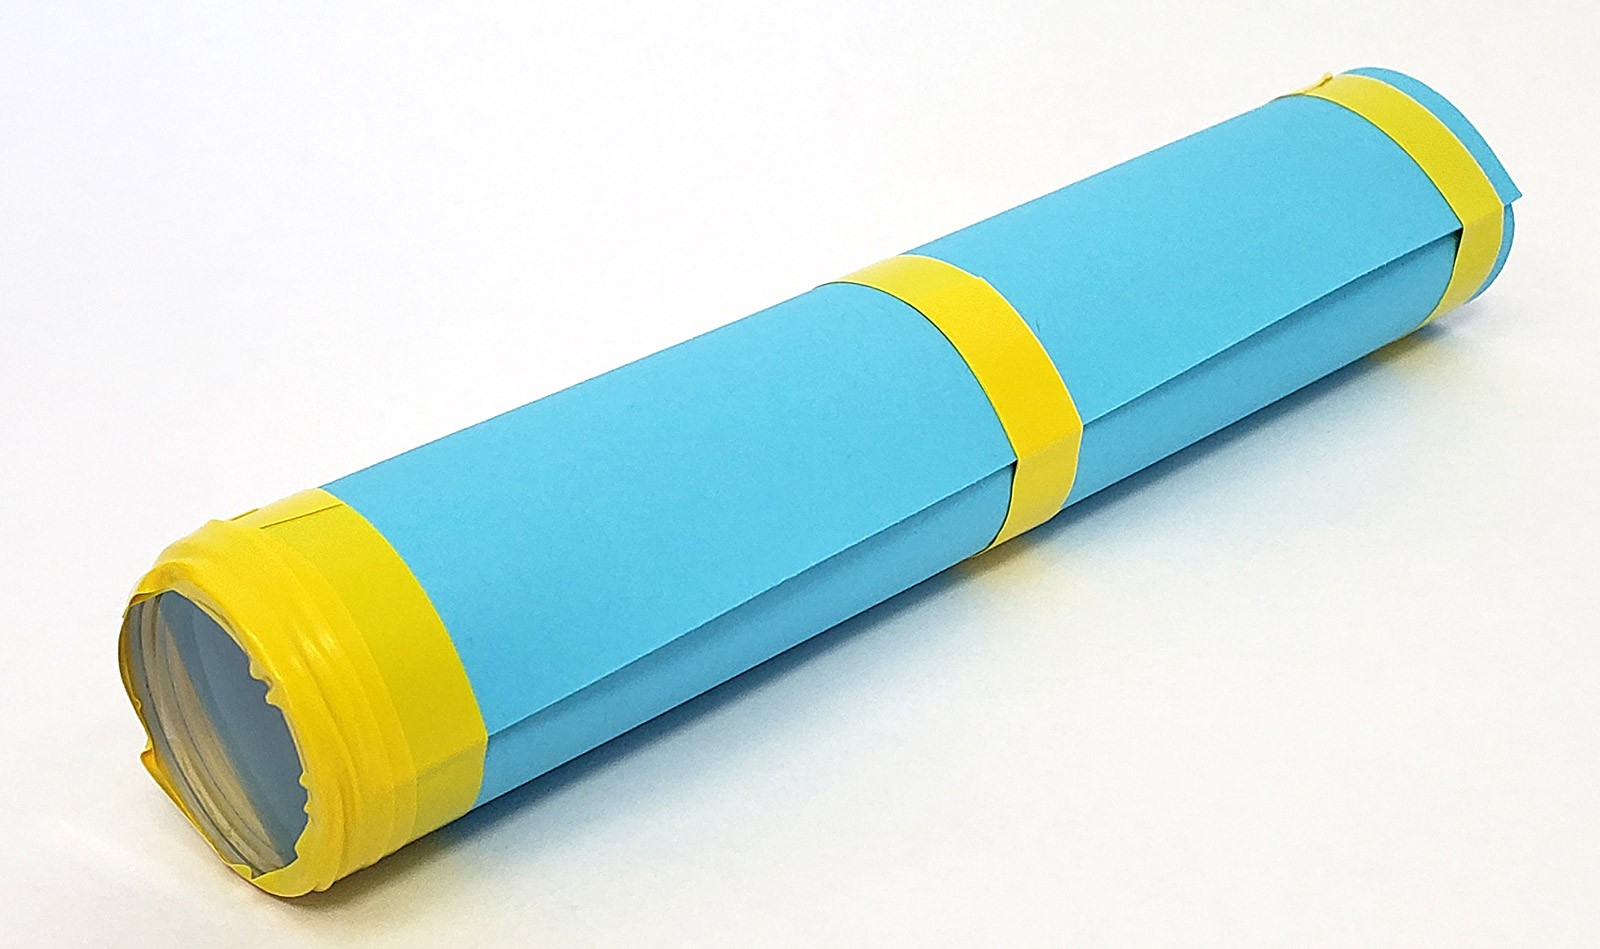 Cardstock tube with a lens taped to one end and additional pieces of tape holding the tube shape in place.